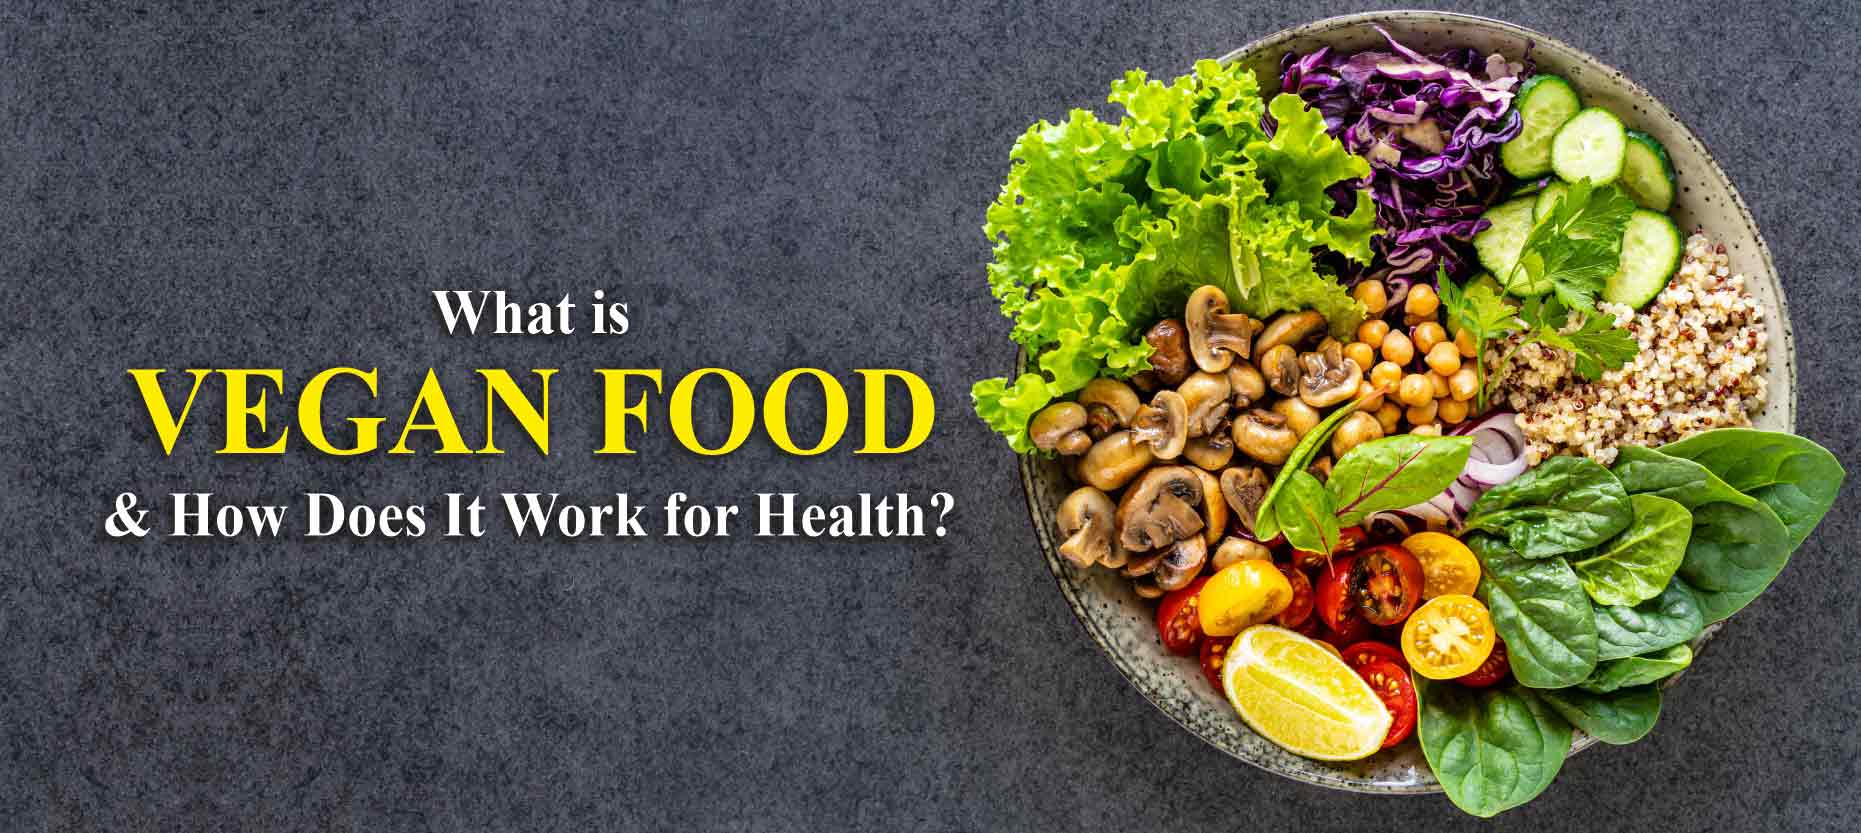 What is Vegan Food & How Does It Work for Health?